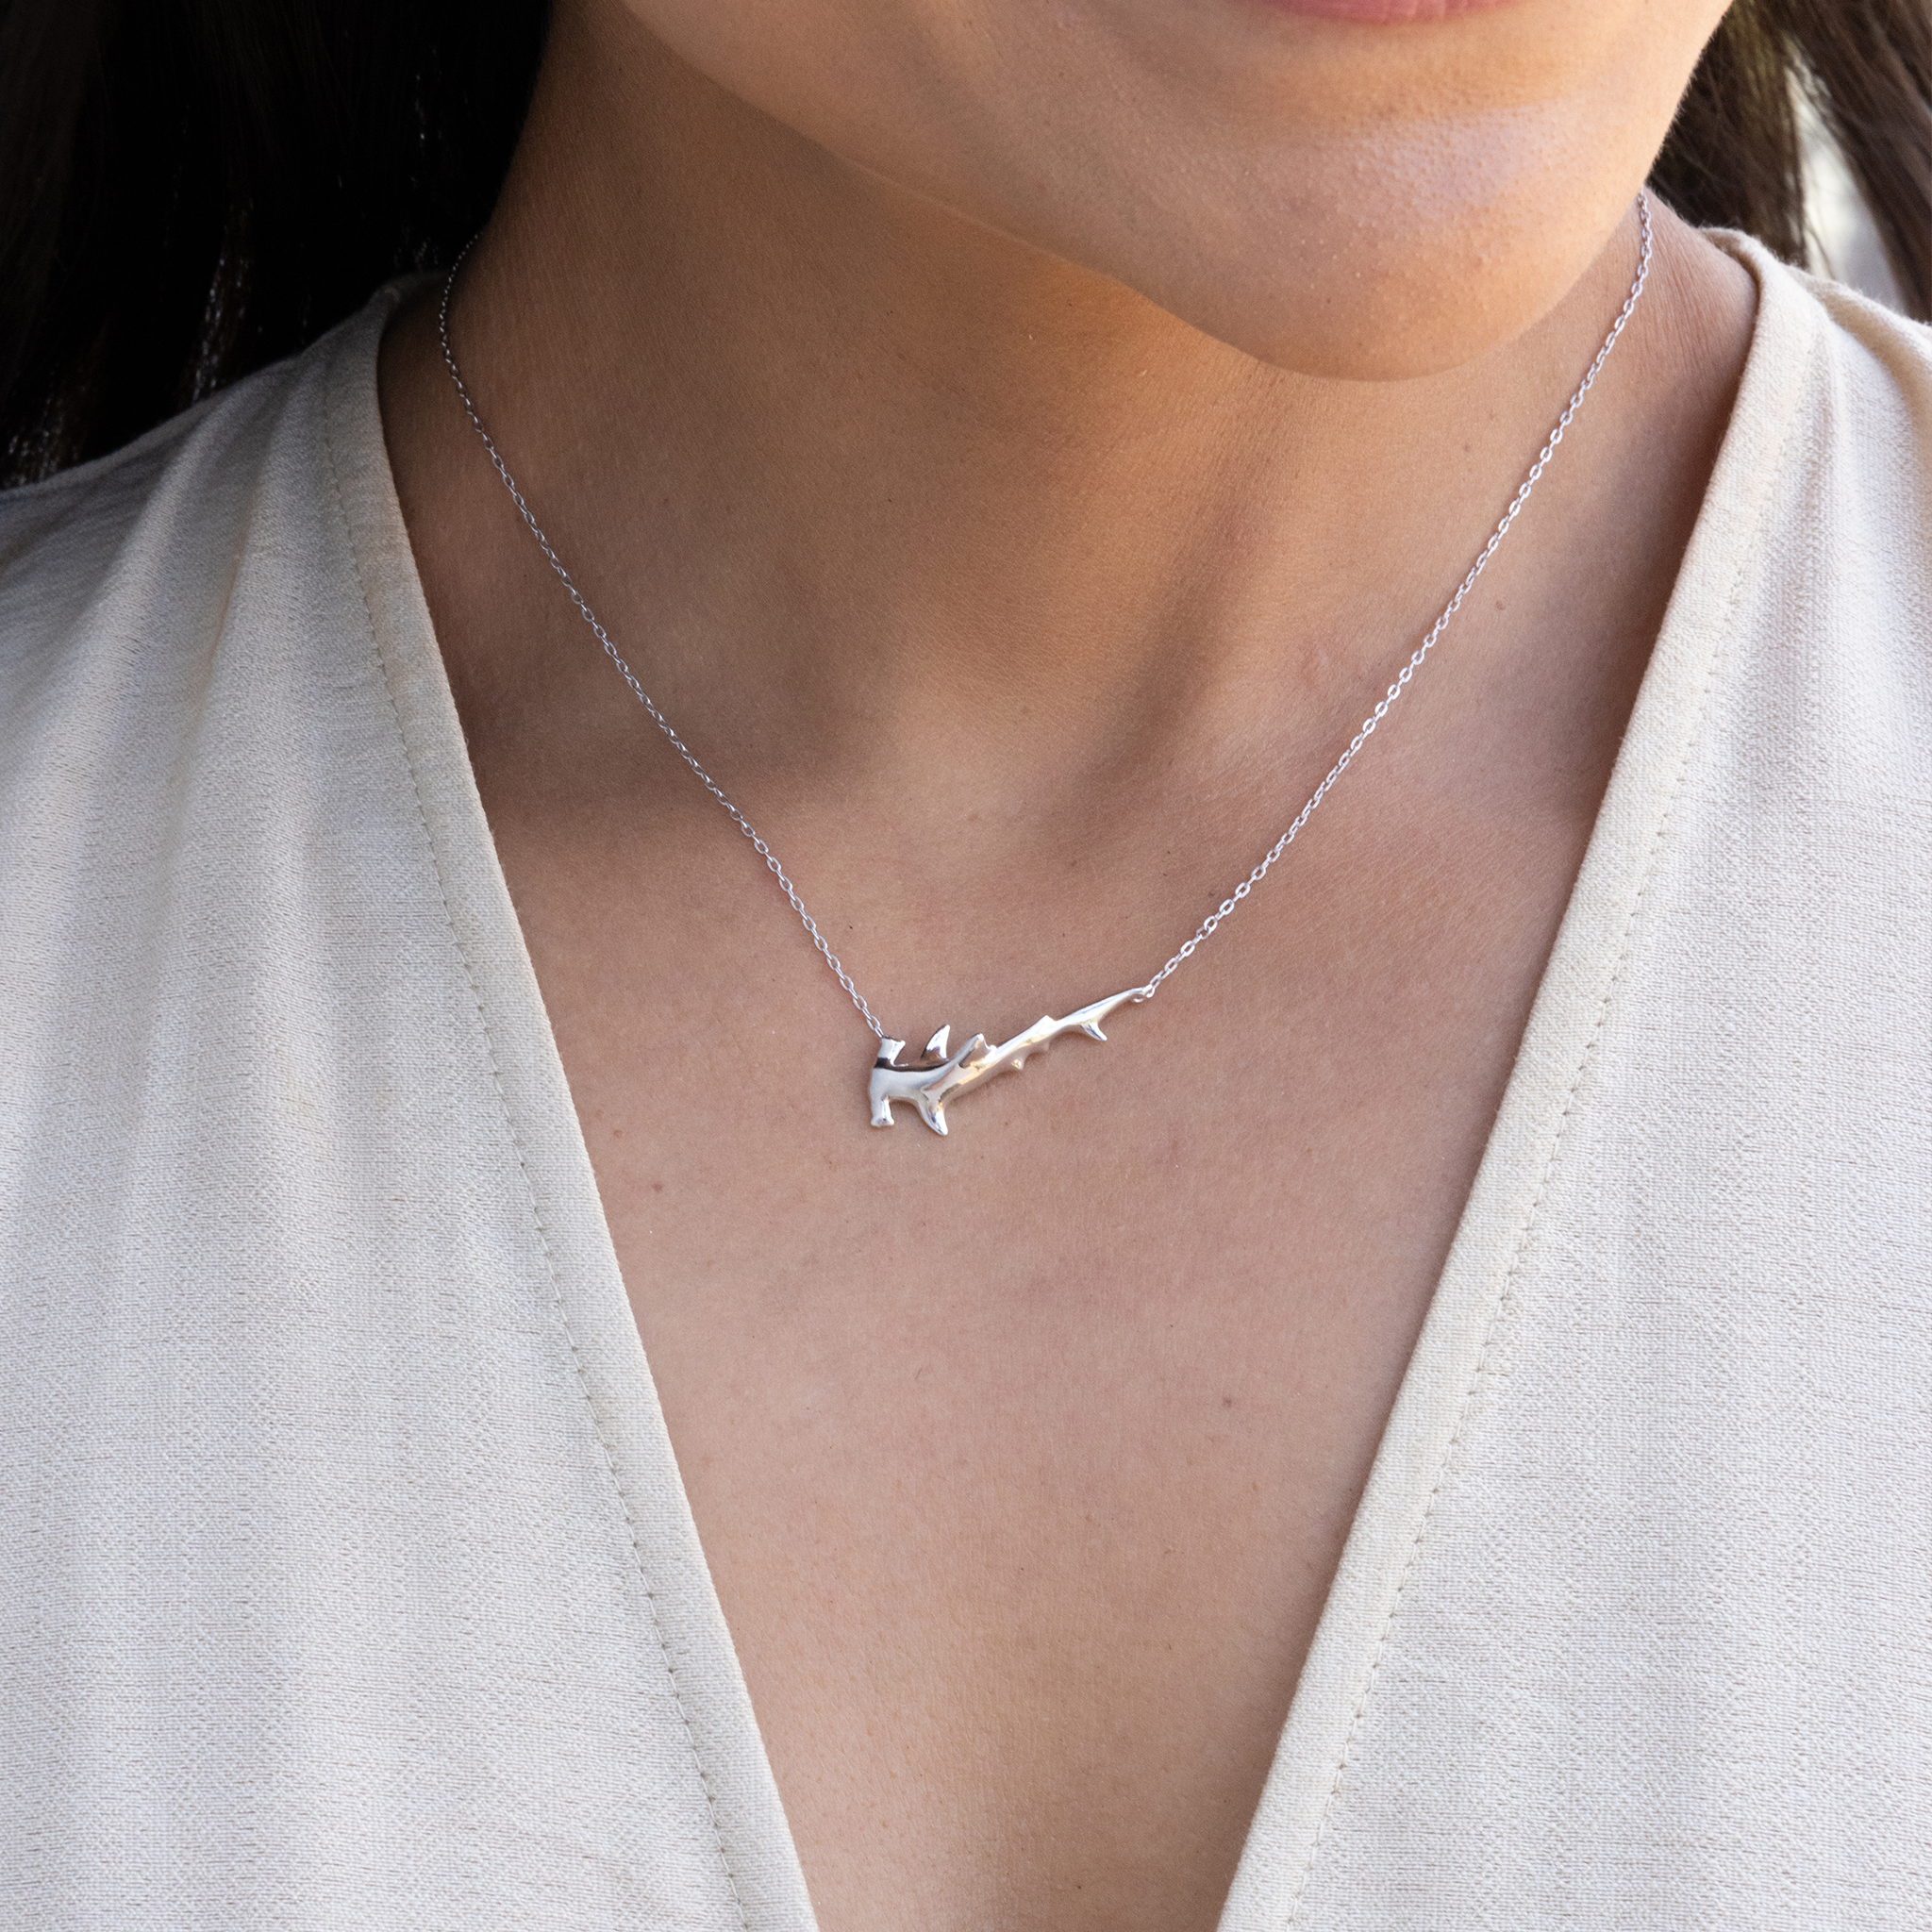 16-18" Adjustable Hammerhead Shark Necklace in White Gold